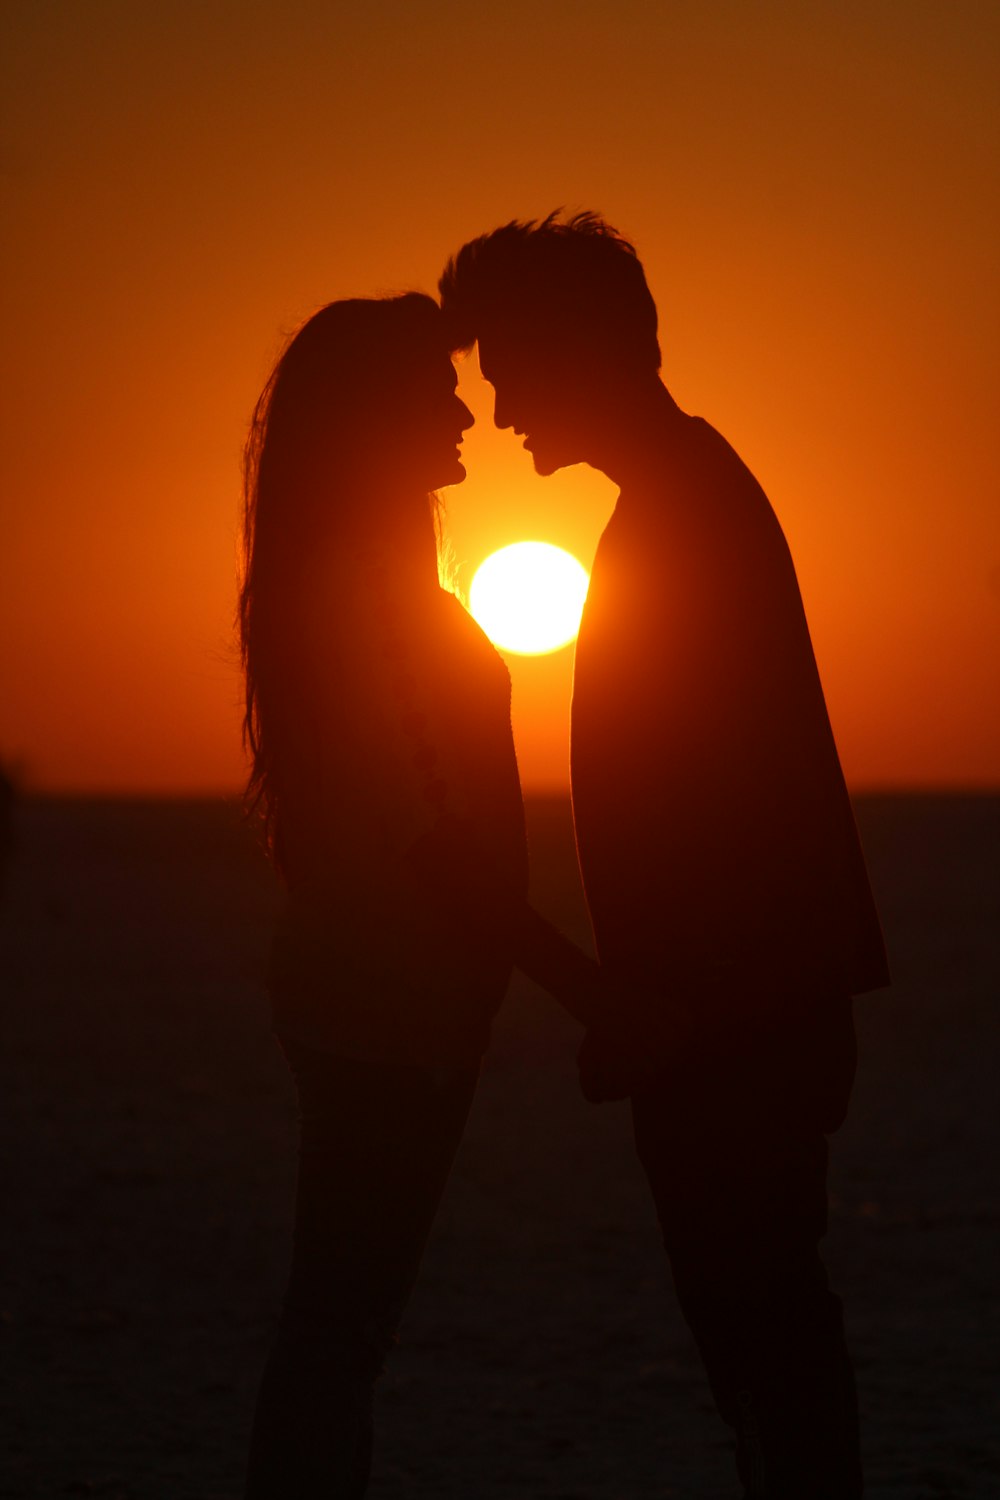 silhouette of man and woman holding hands under the sun